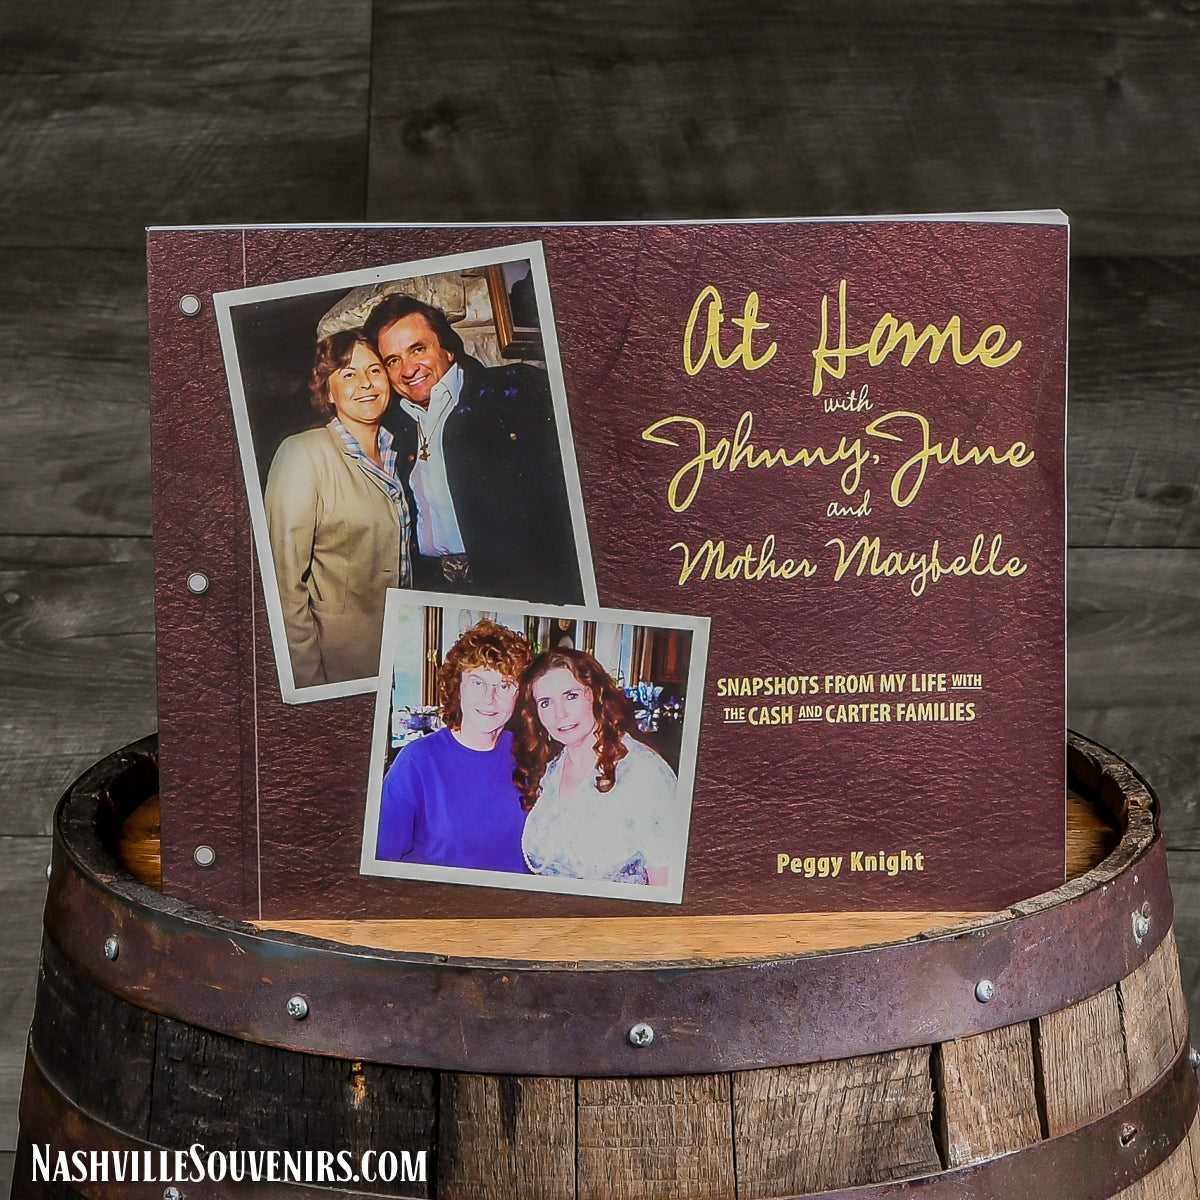 "At Home with Johnny & June Cash" Book